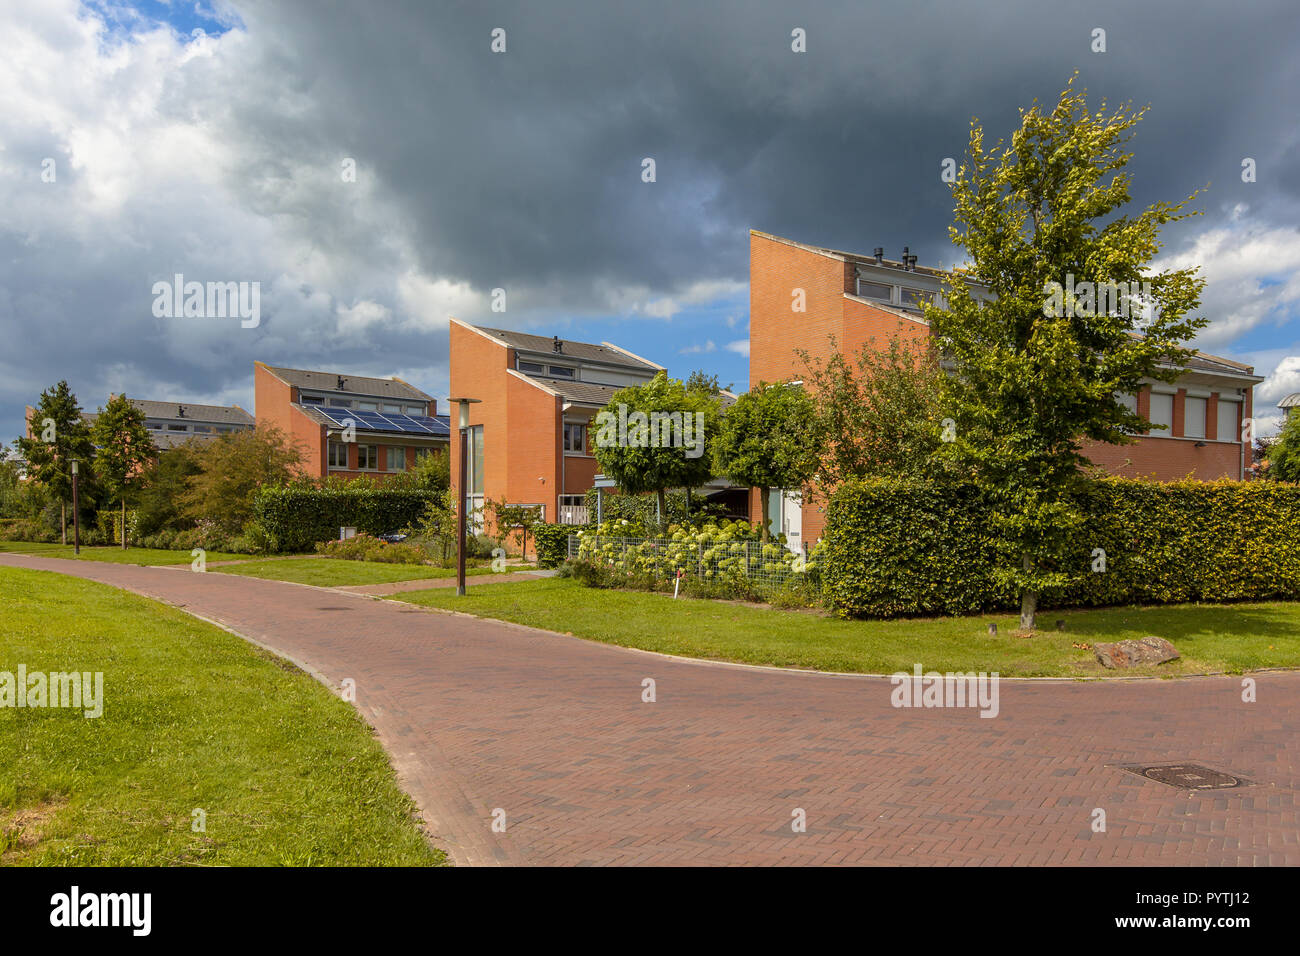 Street with large detached houses with gardens in a suburb of Wageningen City, Netherlands Stock Photo